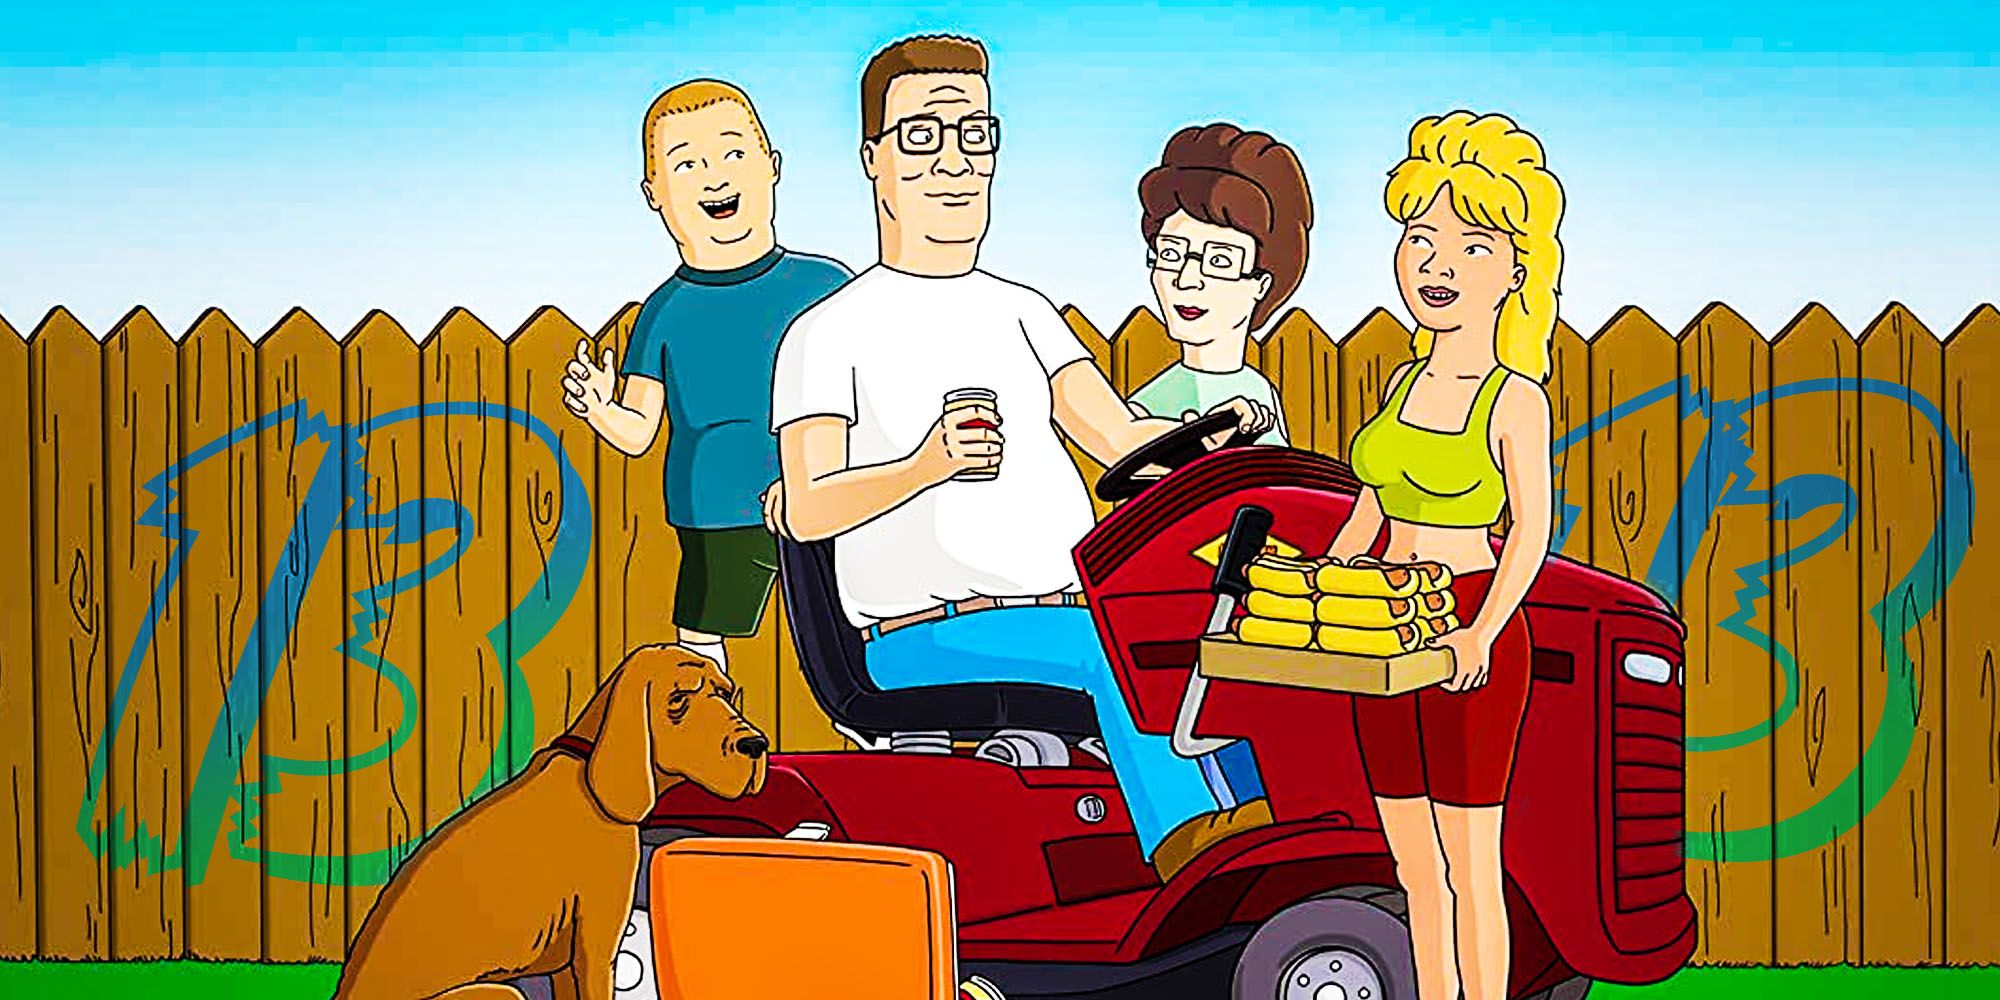 15 Longest Running Animated TV Shows Of All Time Ranked By Duration